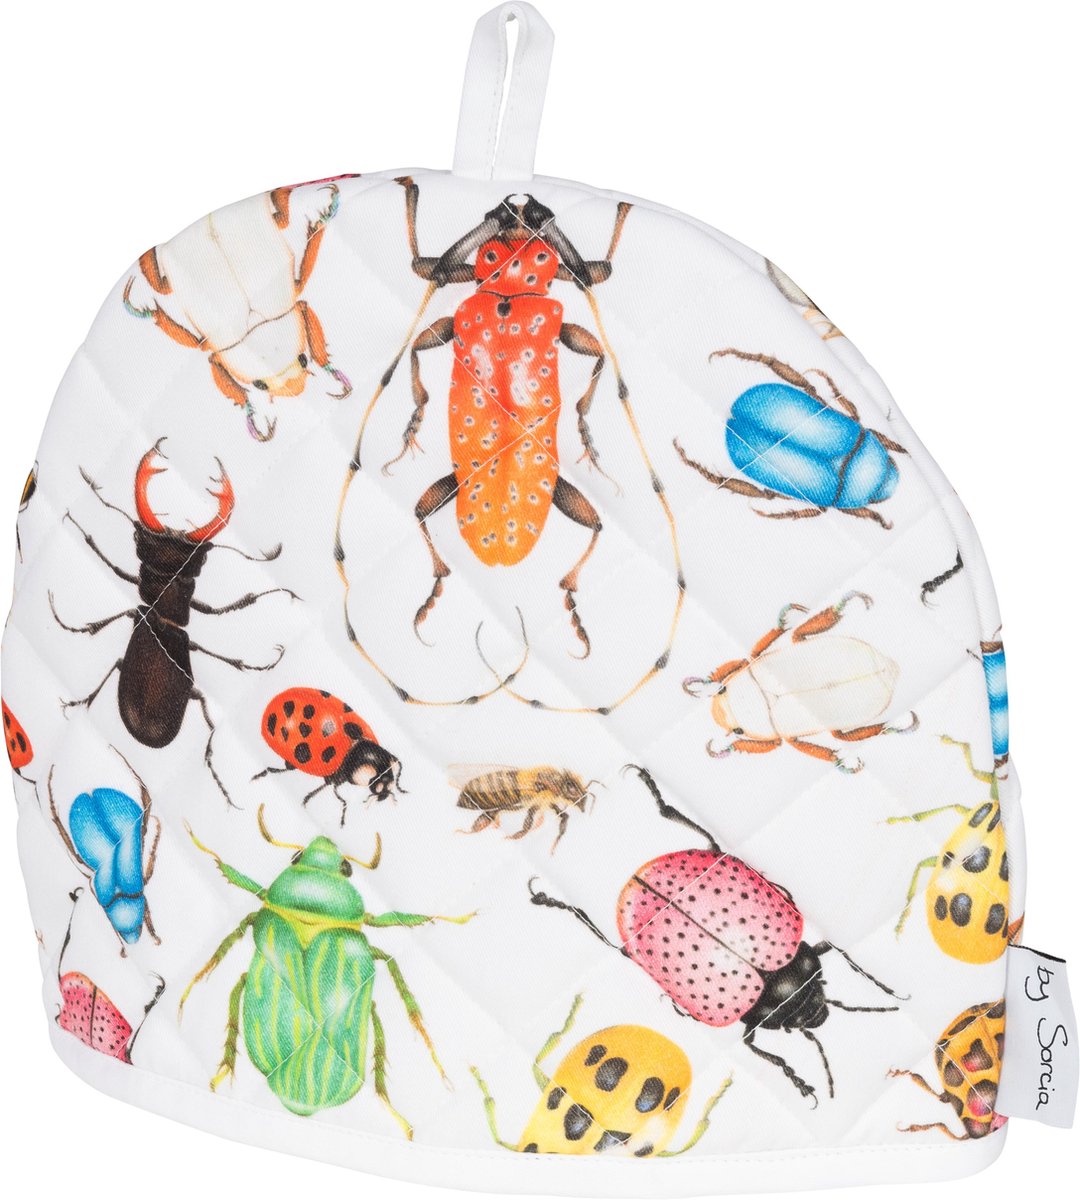 by Sorcia - theemuts Big Insects - 30x25cm - katoen - designed in Holland - by Sorcia